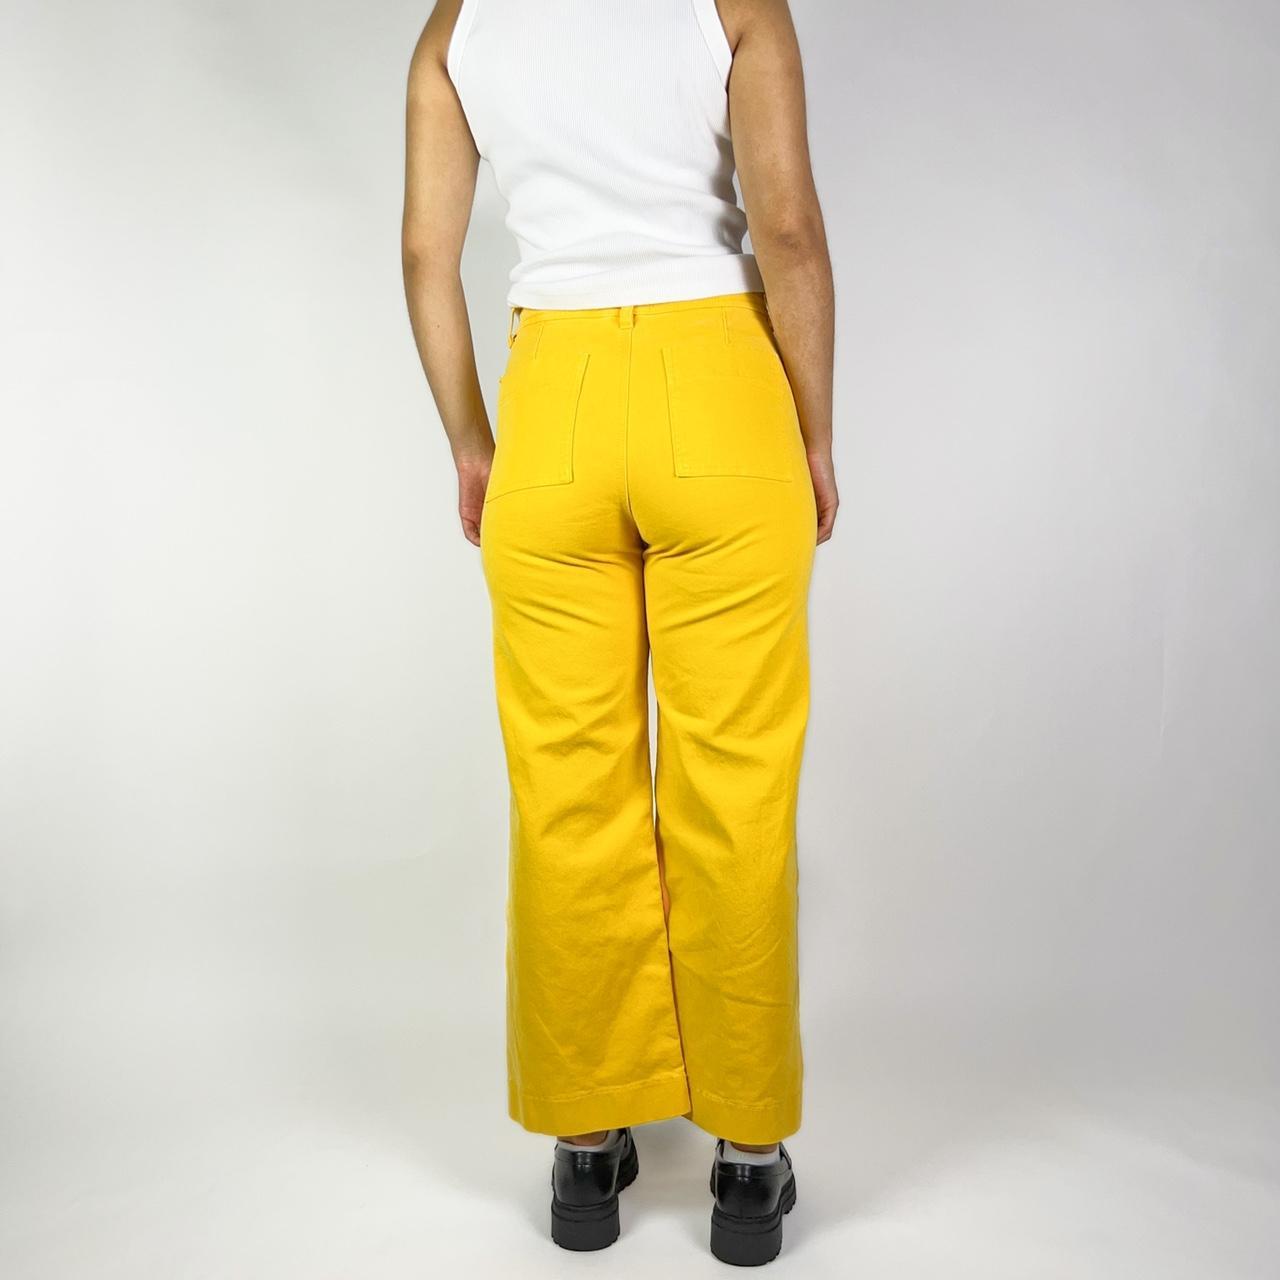 MiH Women's Yellow Jeans (4)